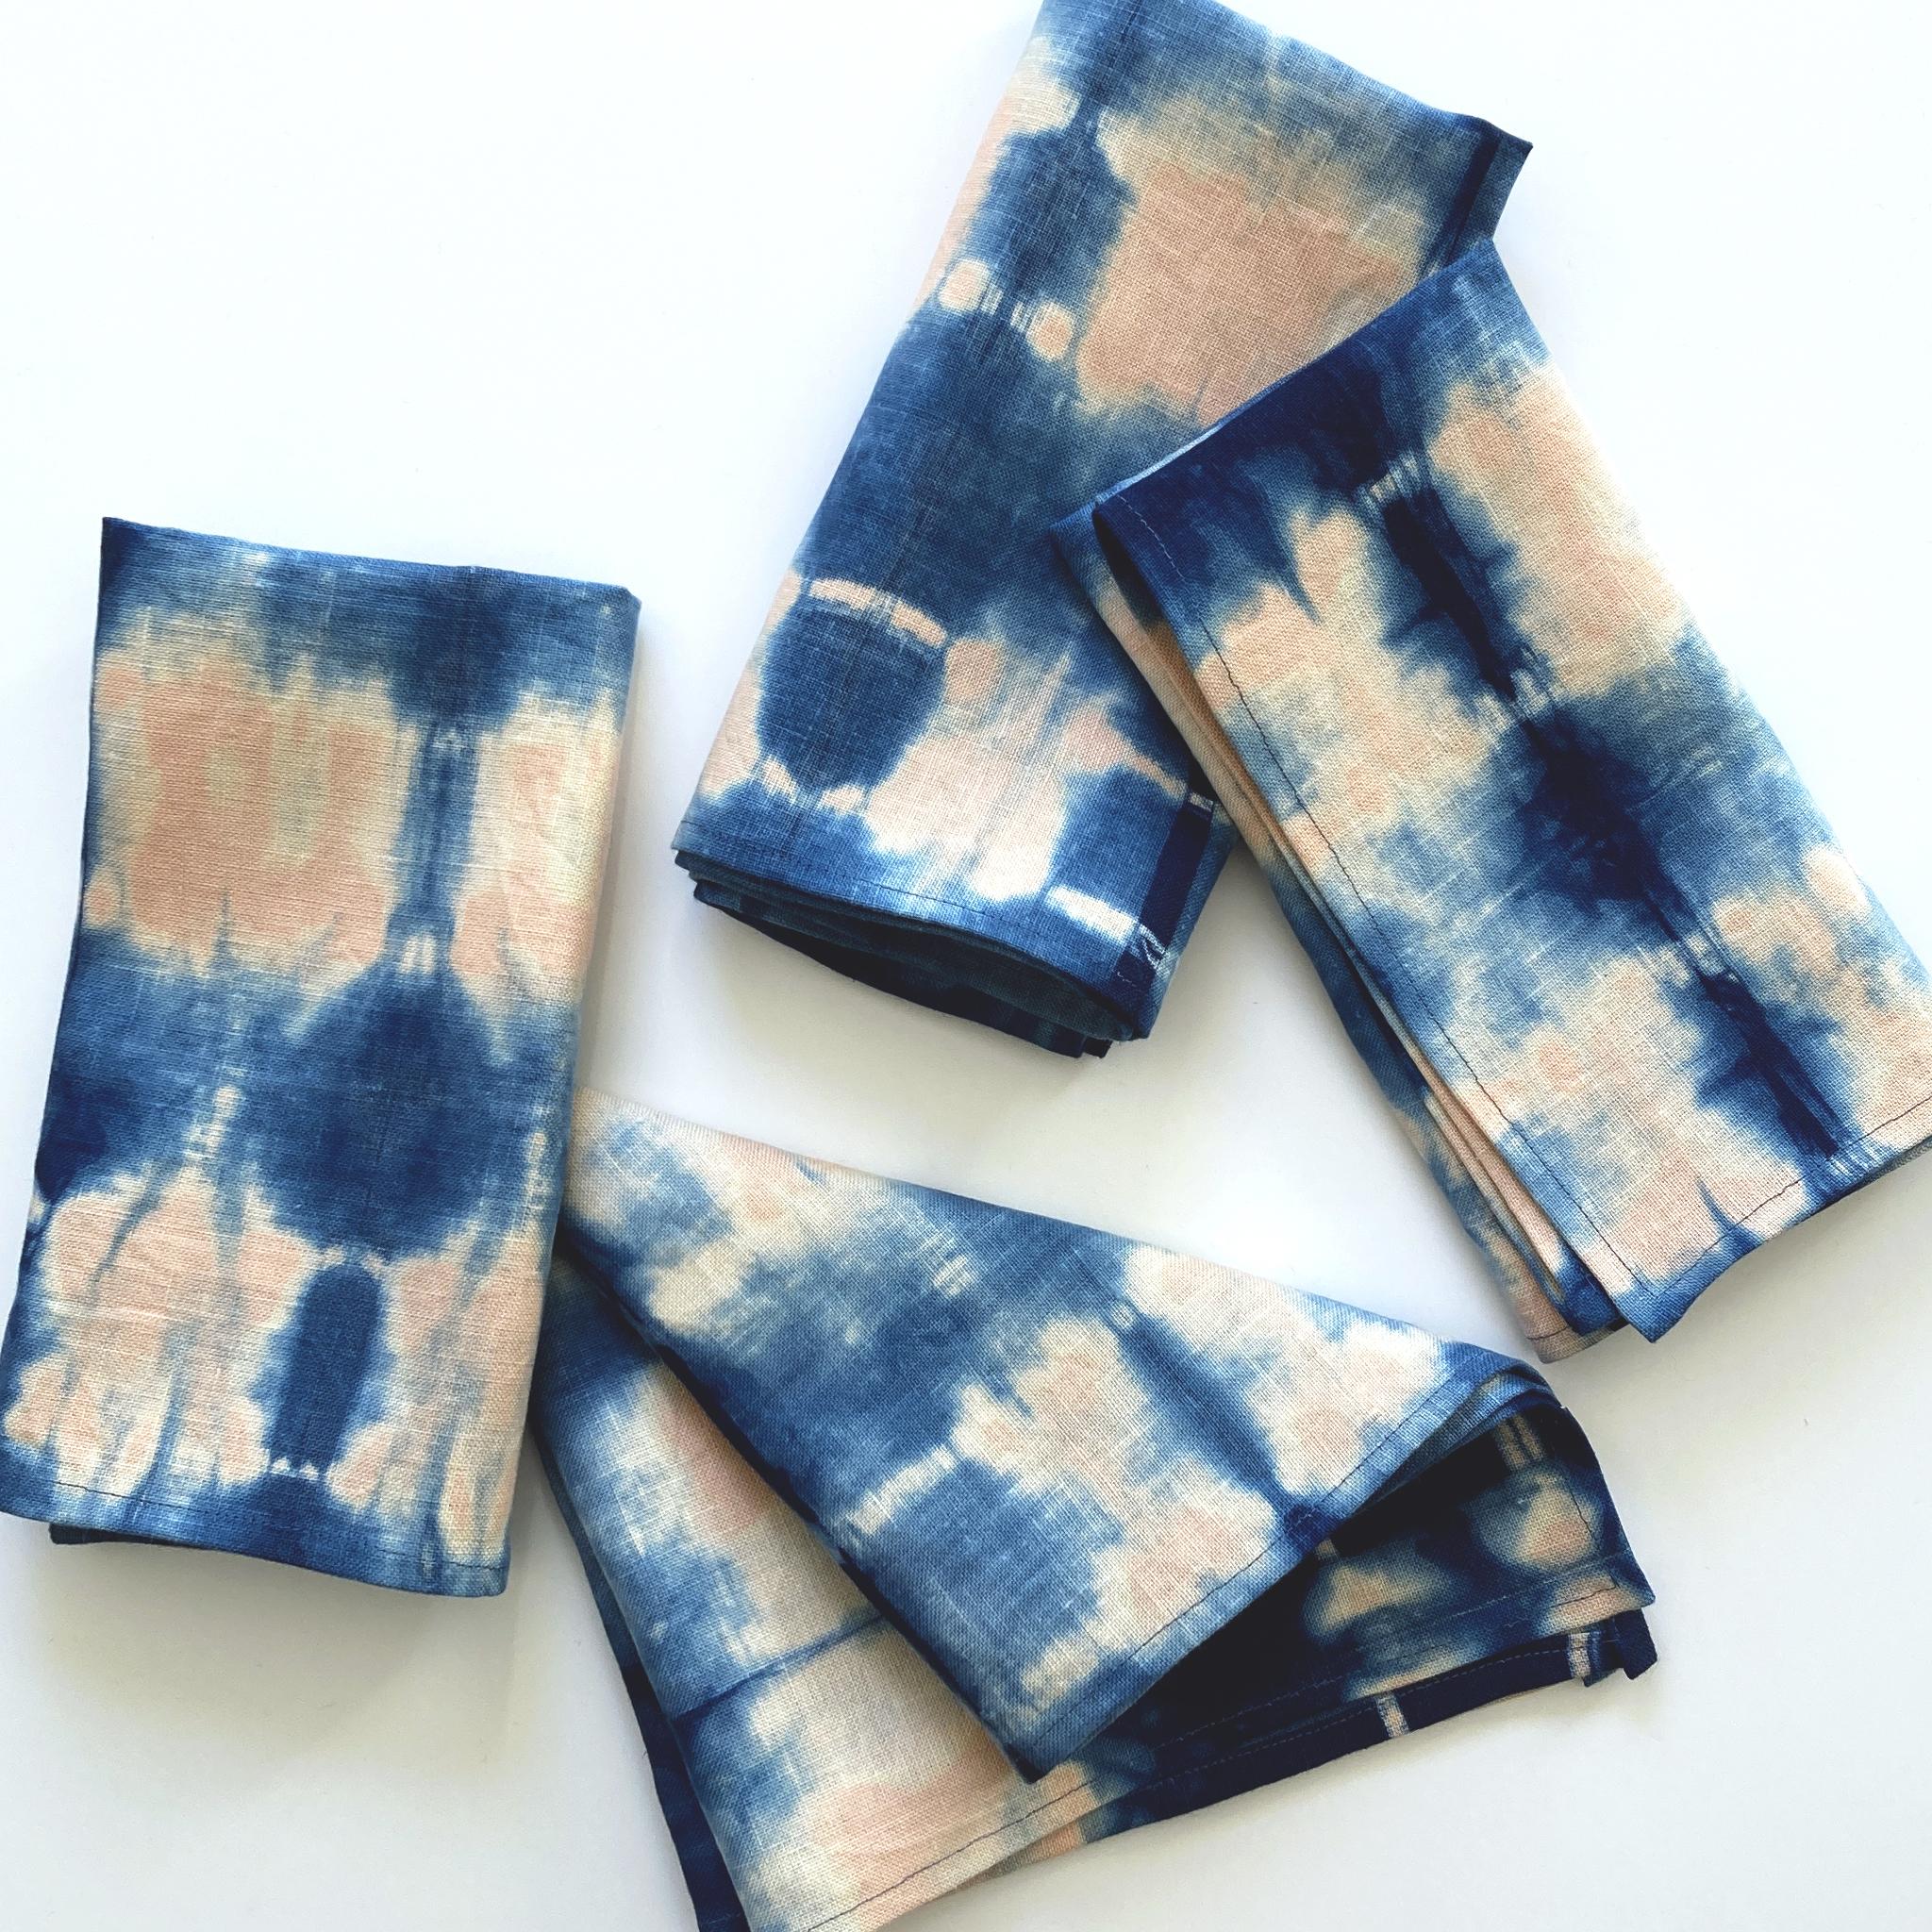 Rose linen napkins, set of four, dyed with indigo in Pleat pattern. Hand-dyed and sewn in New York City. Napkins measure approximately 18 x 18 inches. Each linen napkin is hand dyed and one of a kind. 

Each linen panel is cut and folded by hand, in